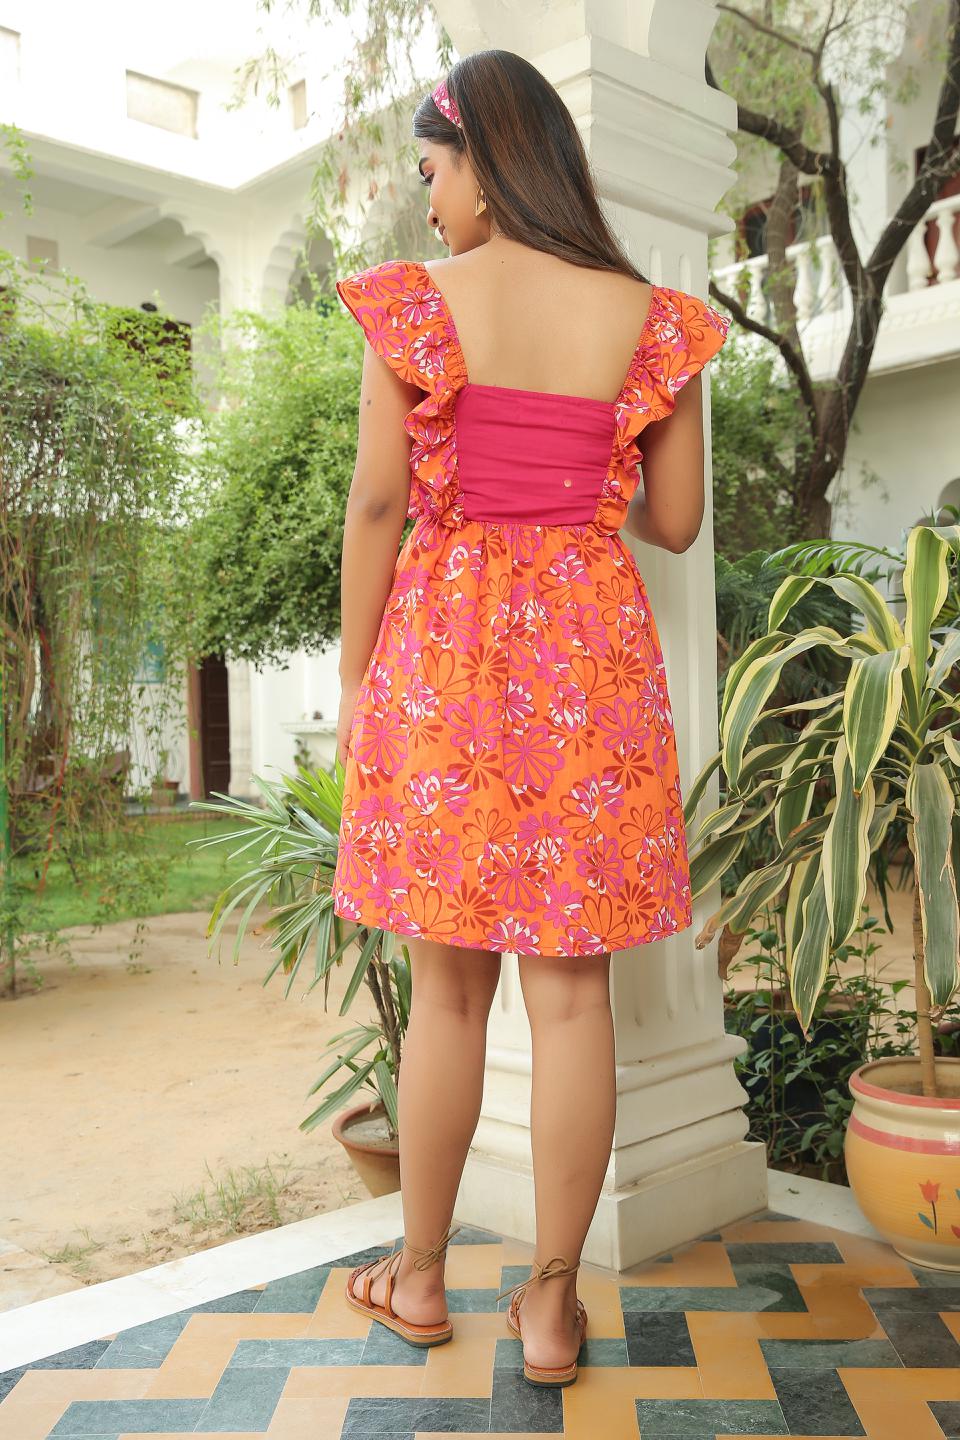 tan-orange-floral-print-dress-with-ruffled-sleeves-11704005OR, Women Clothing, Cotton Dress